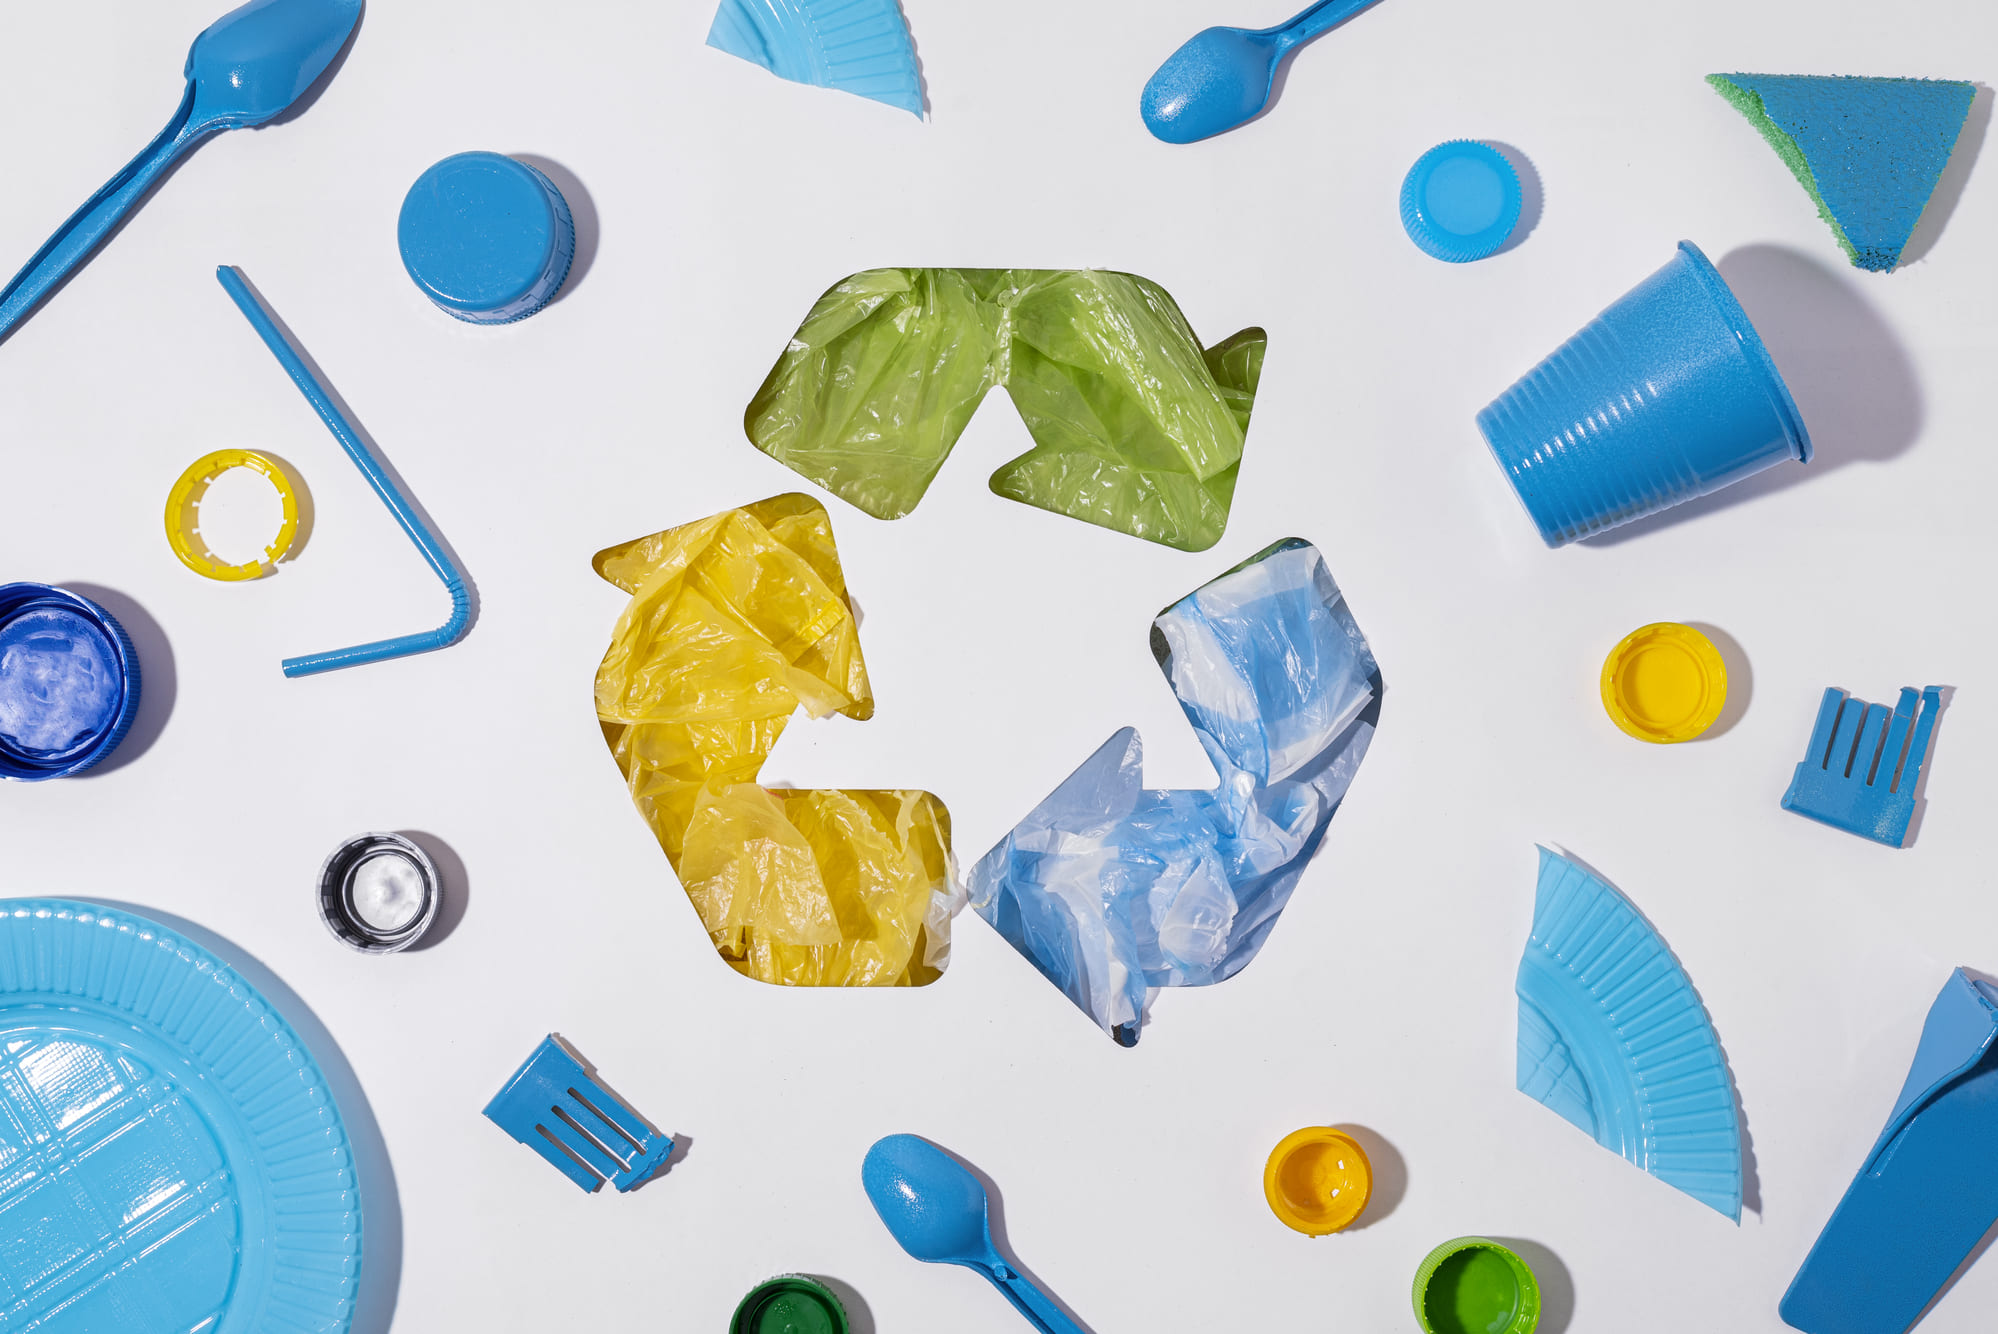 Recycling plastic film and packaging